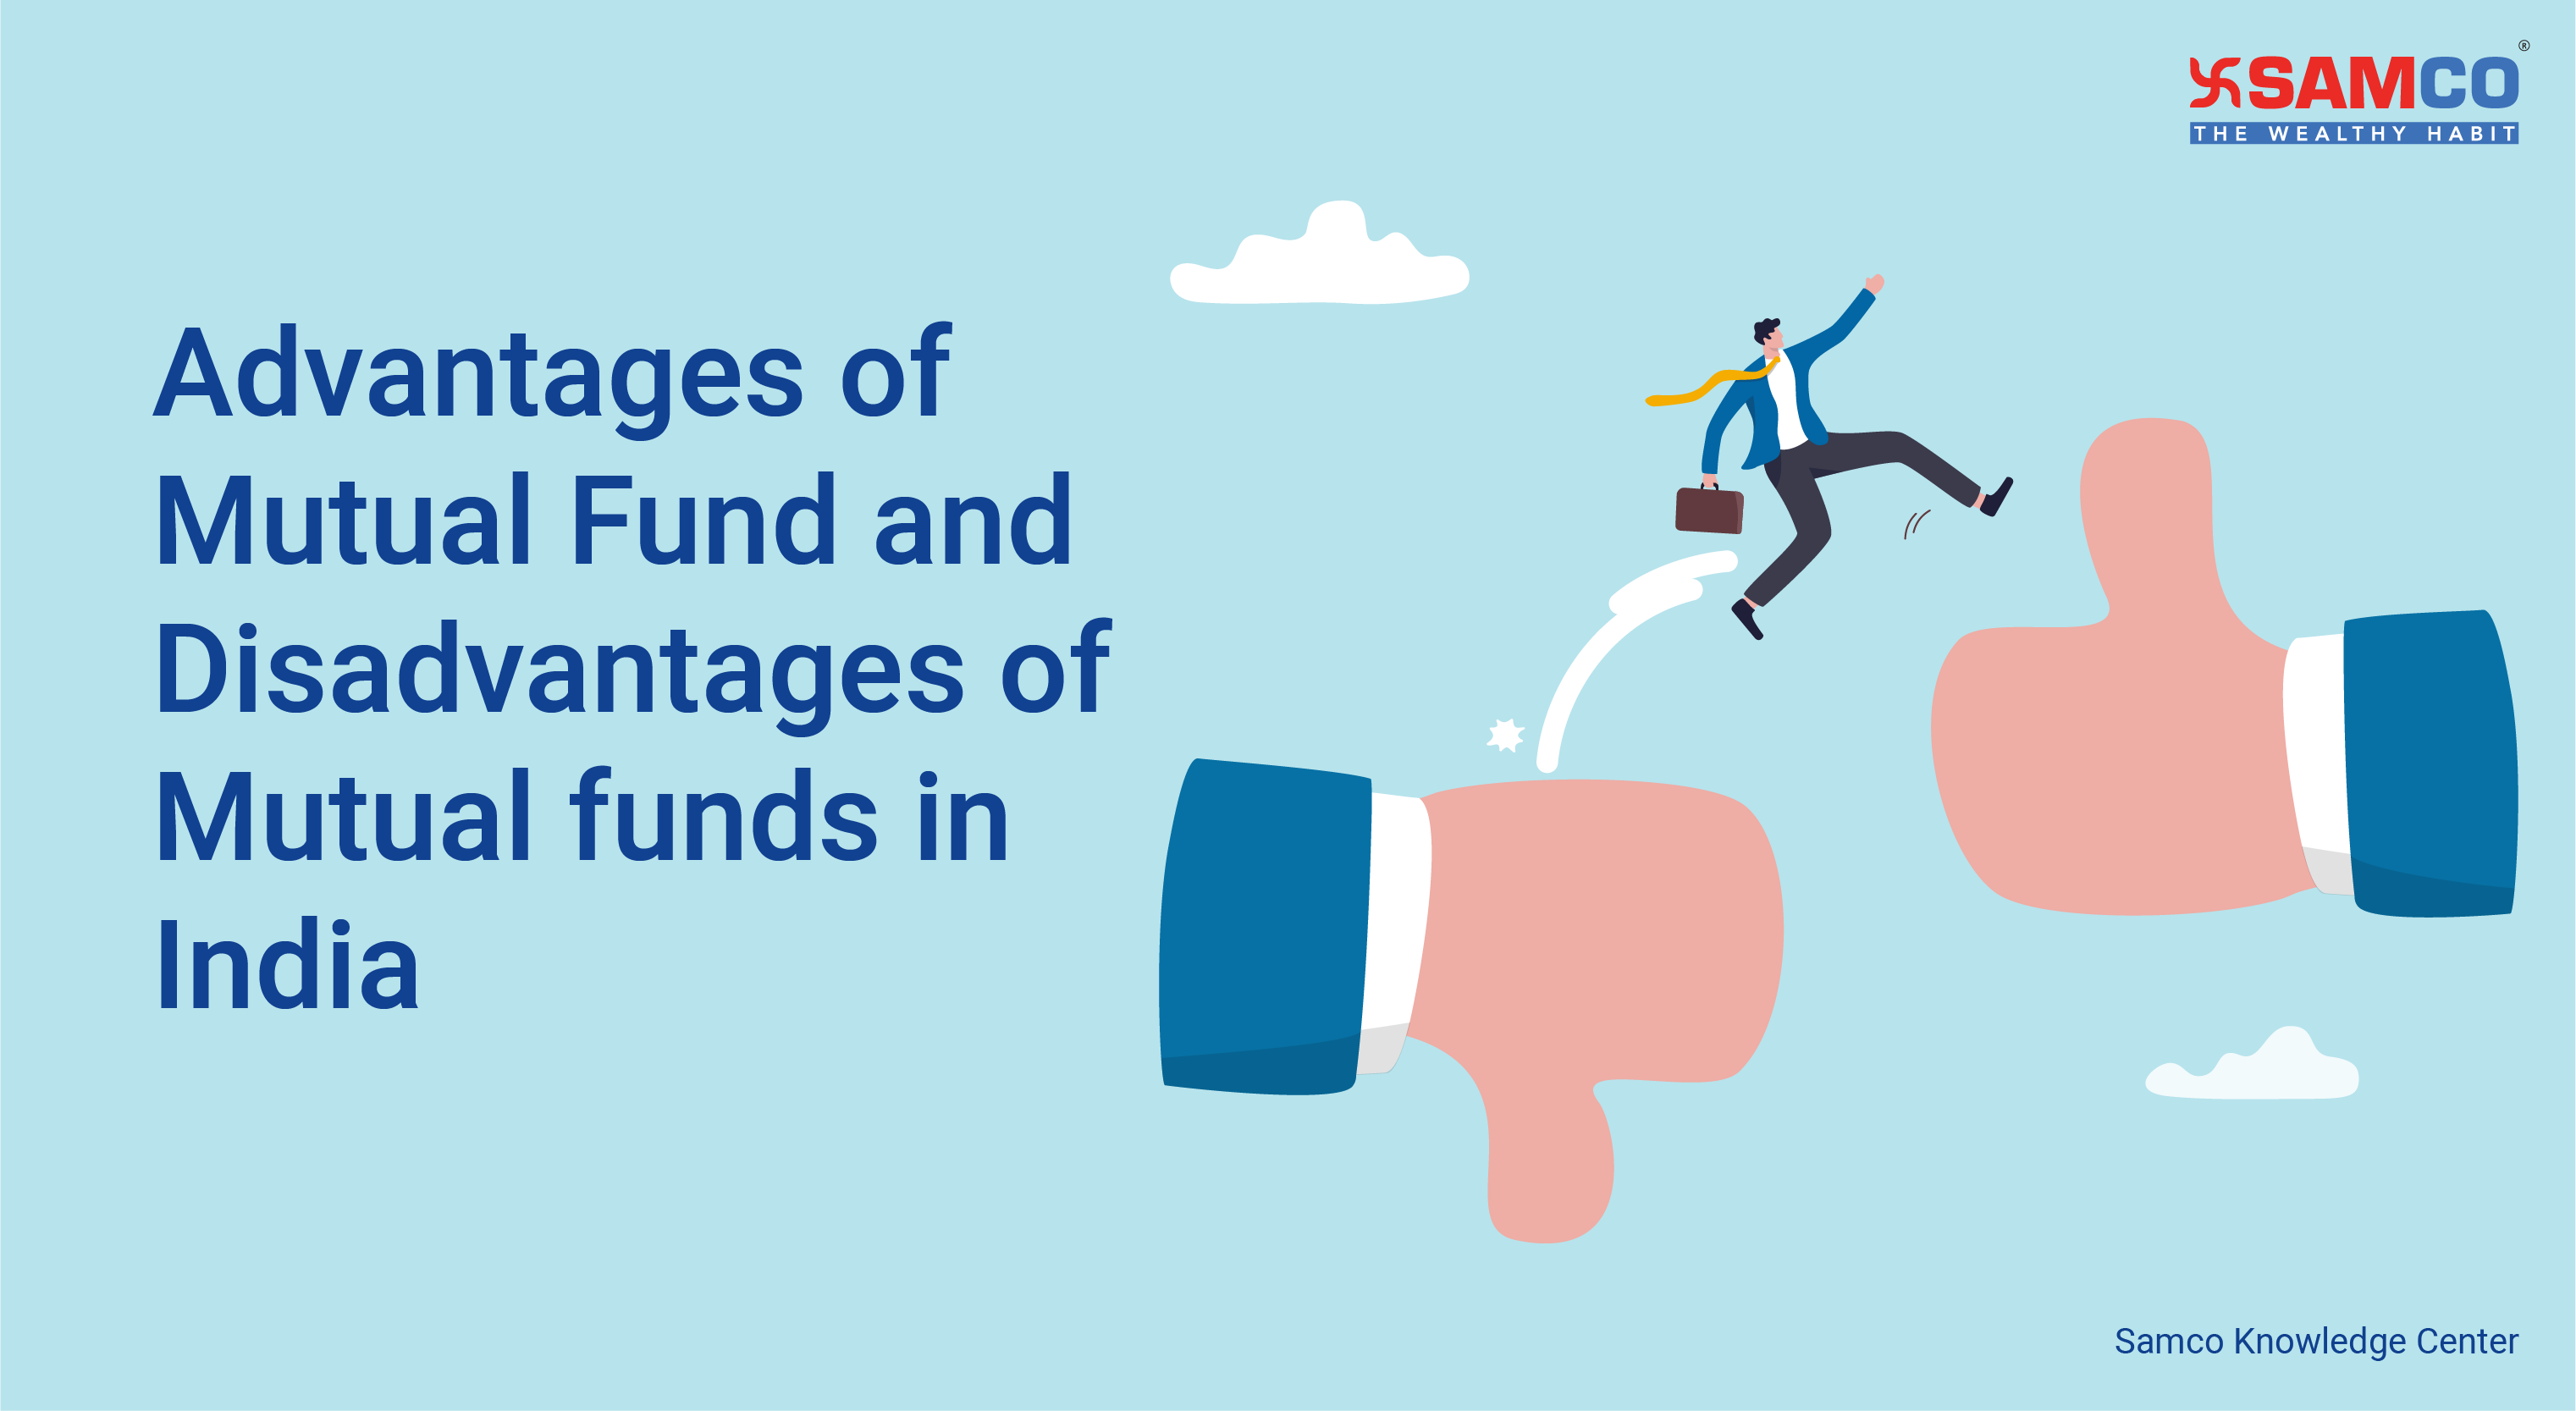 Advantages of Mutual Fund and Disadvantages of Mutual funds in India